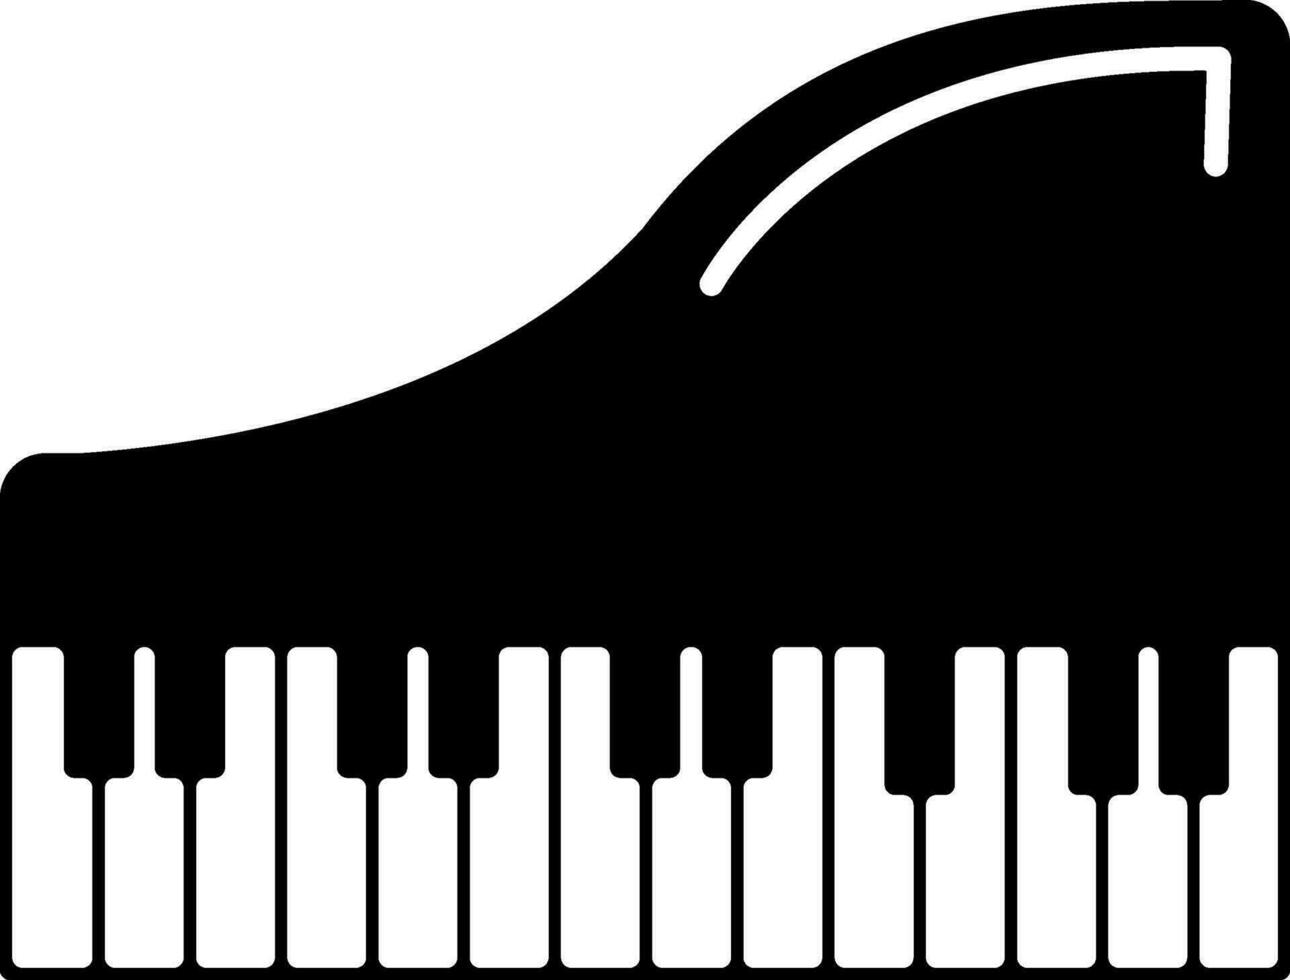 Musical Instrument, Piano sign or symbol. vector